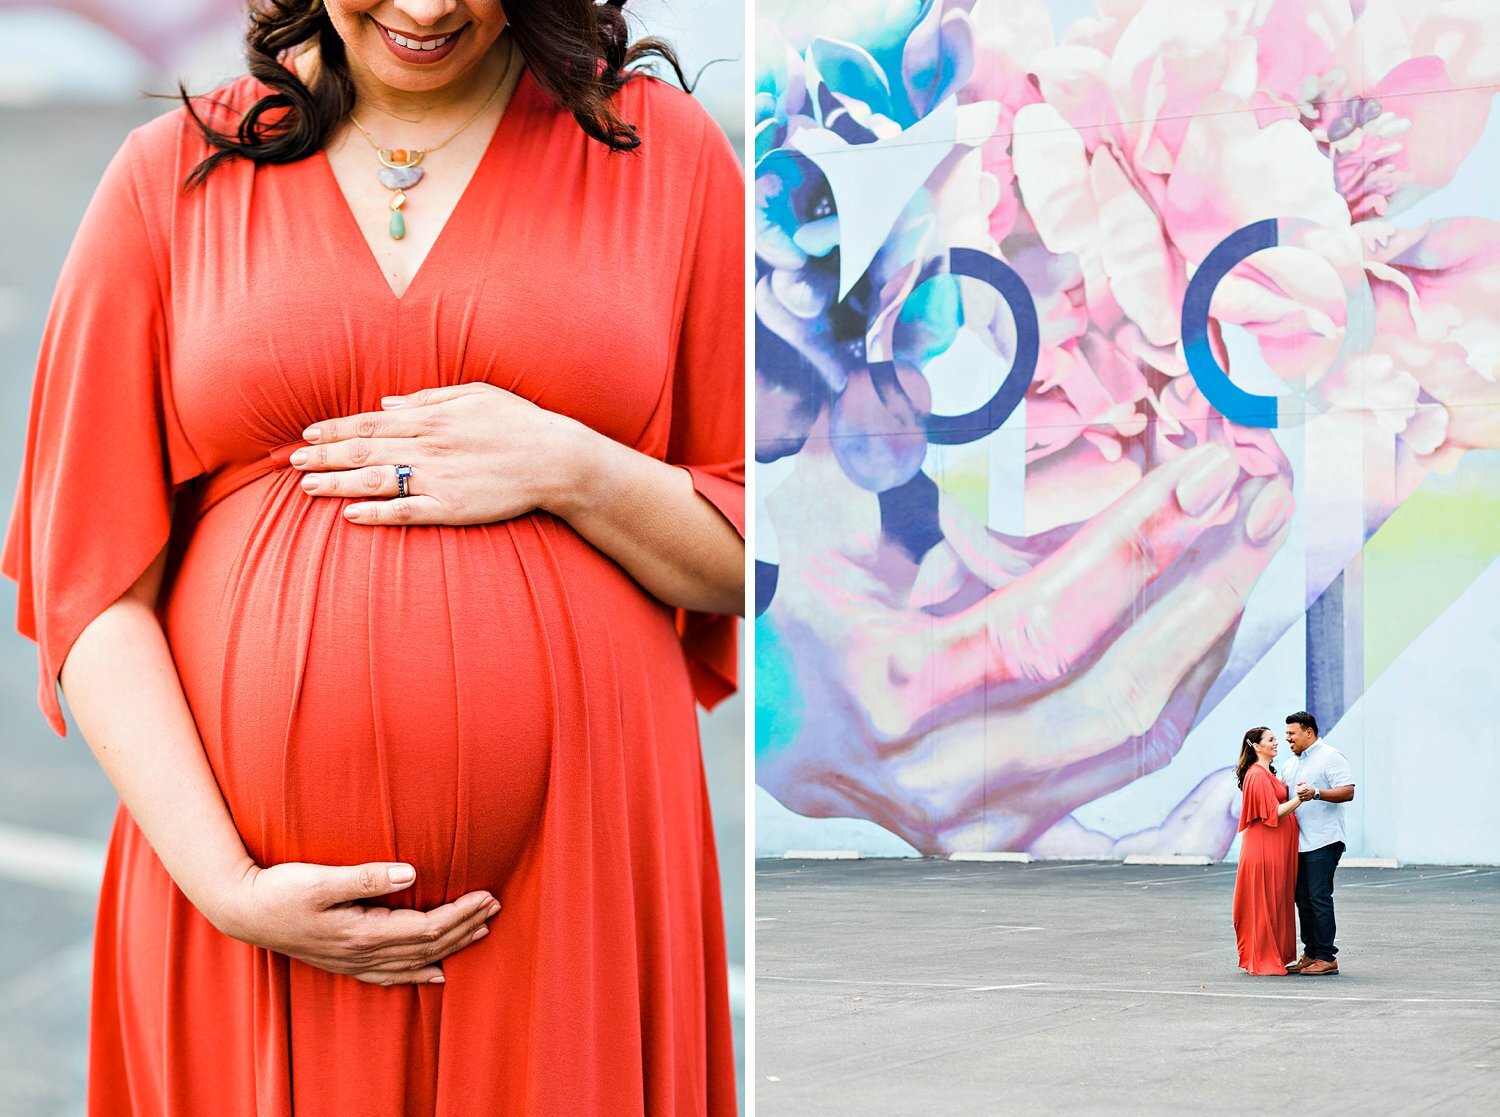 Los Angeles Arts District Engagement Session - Estee and Jose_0032.jpg